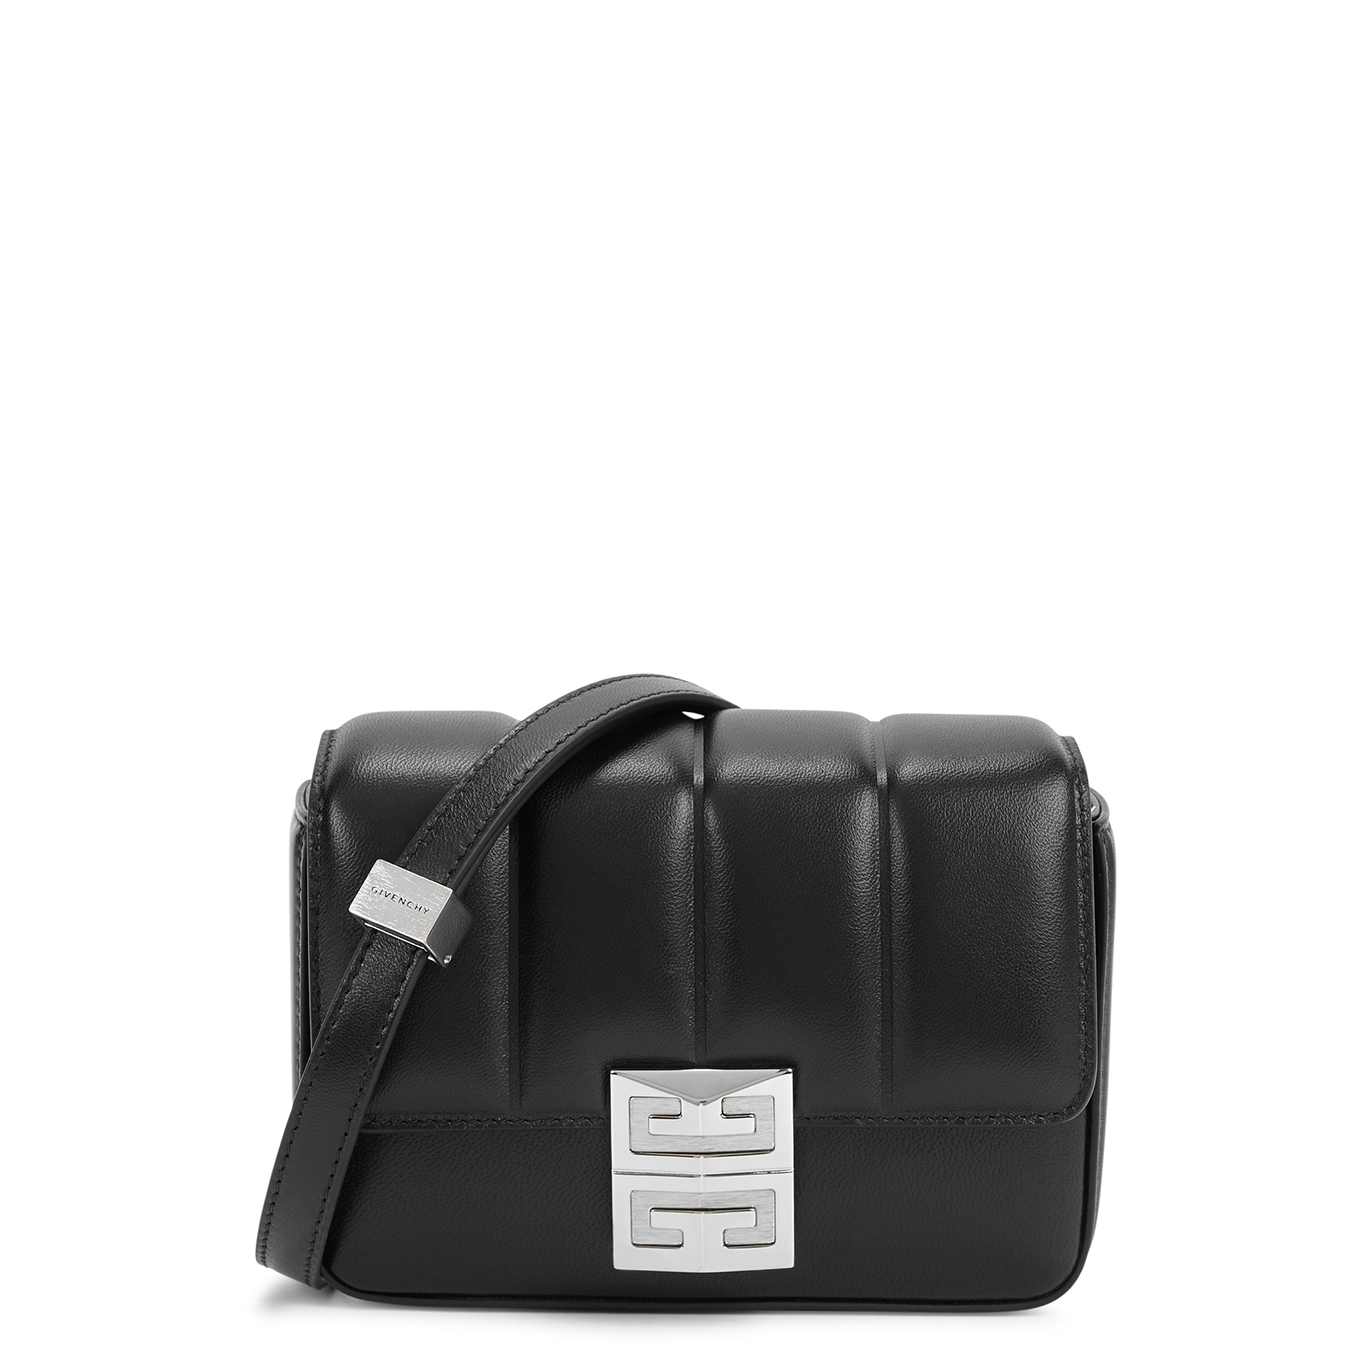 Givenchy 4G Small Black Leather Cross-body Bag